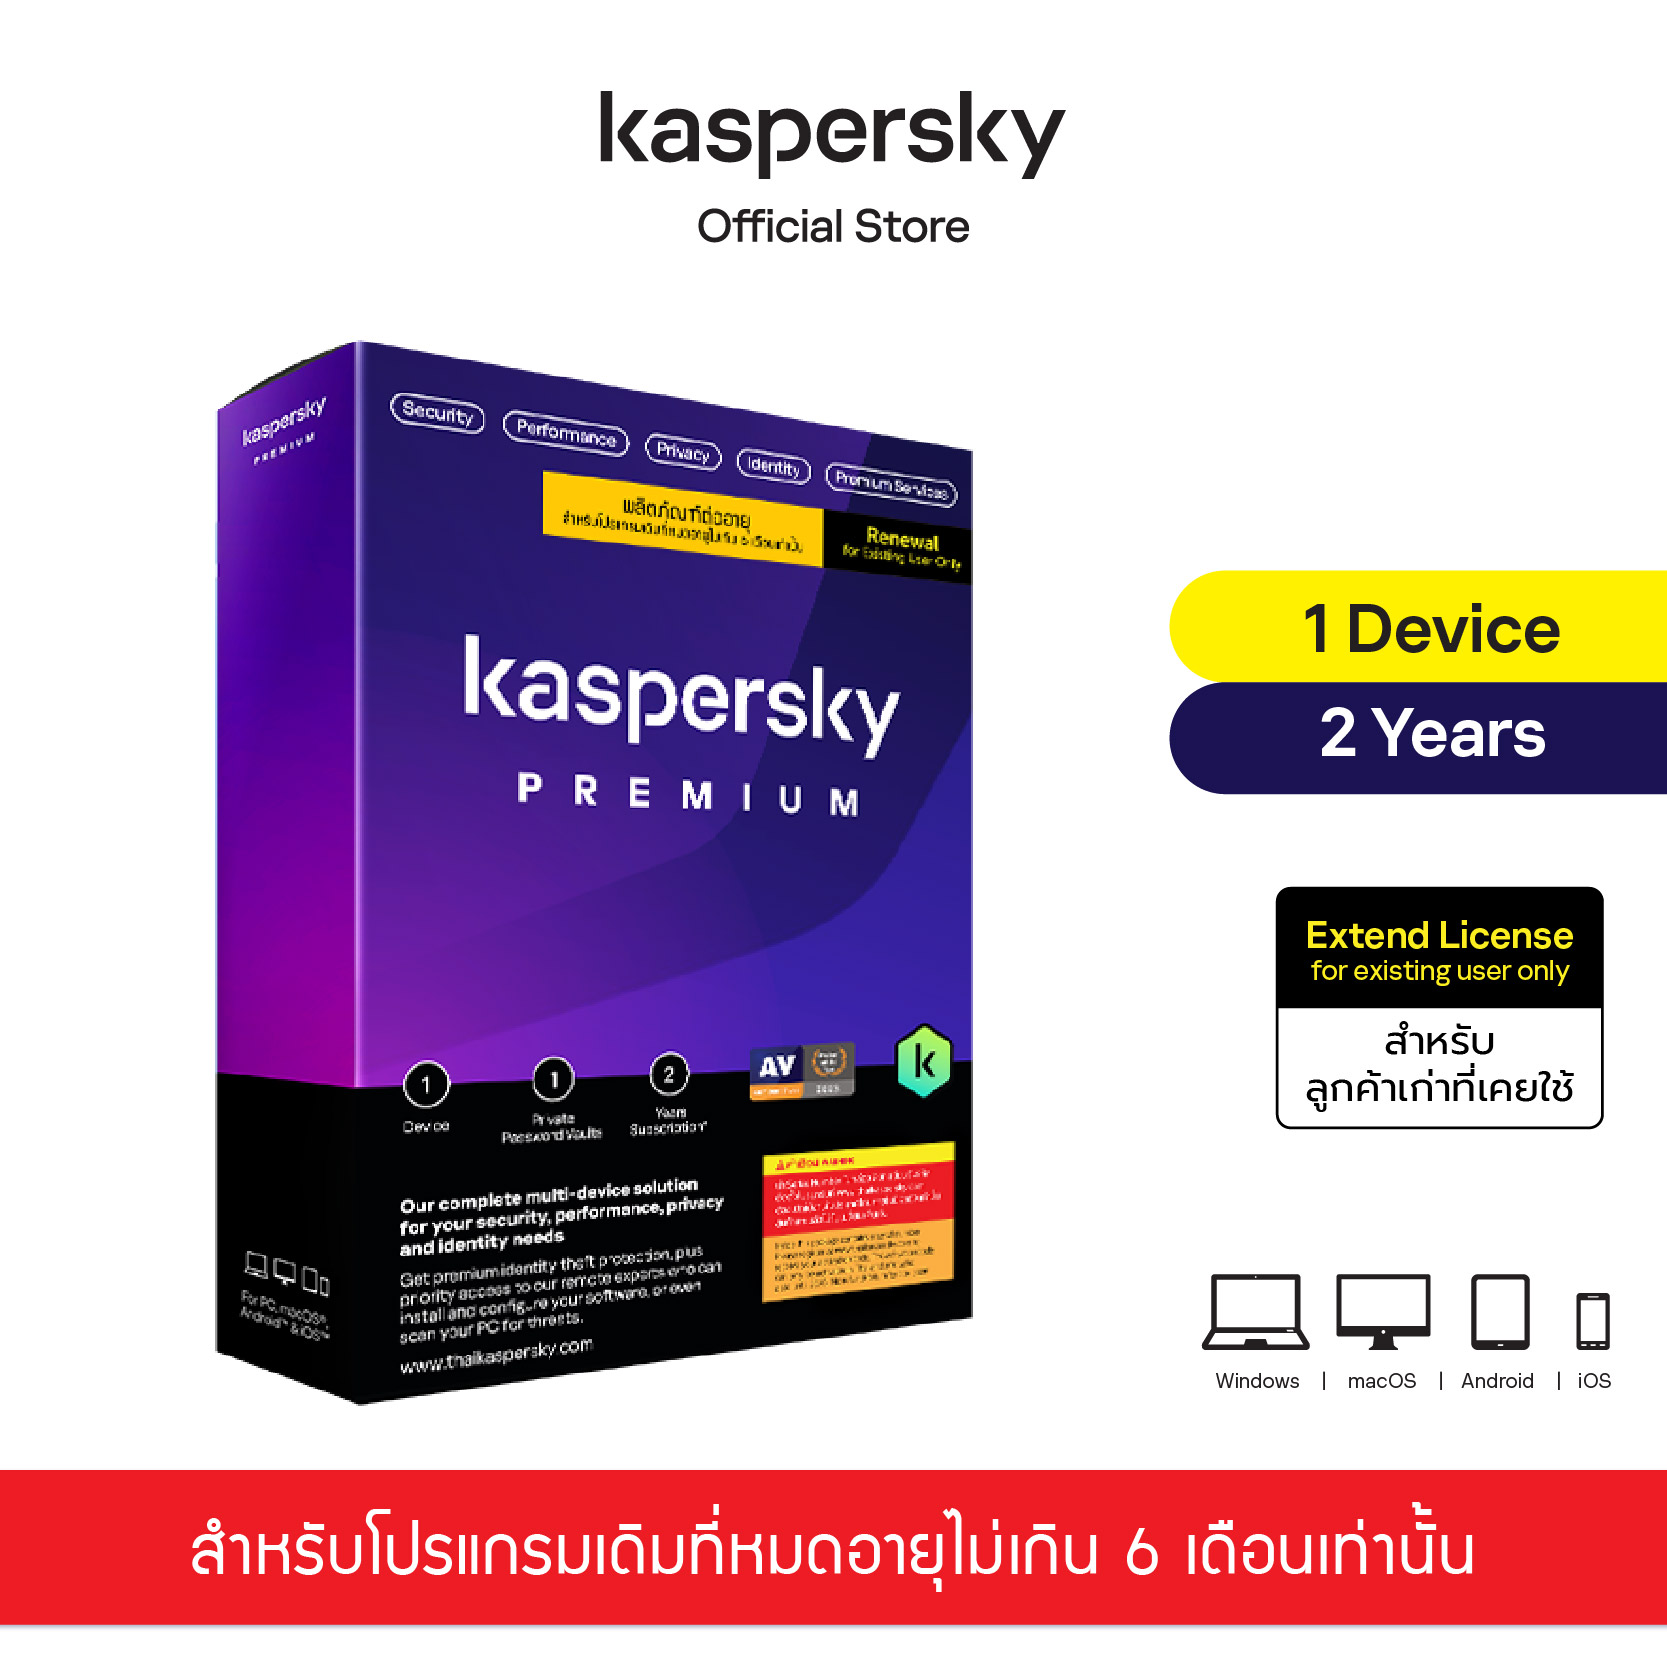 Kaspersky Premium 1 Device 2 Year (Extend License)